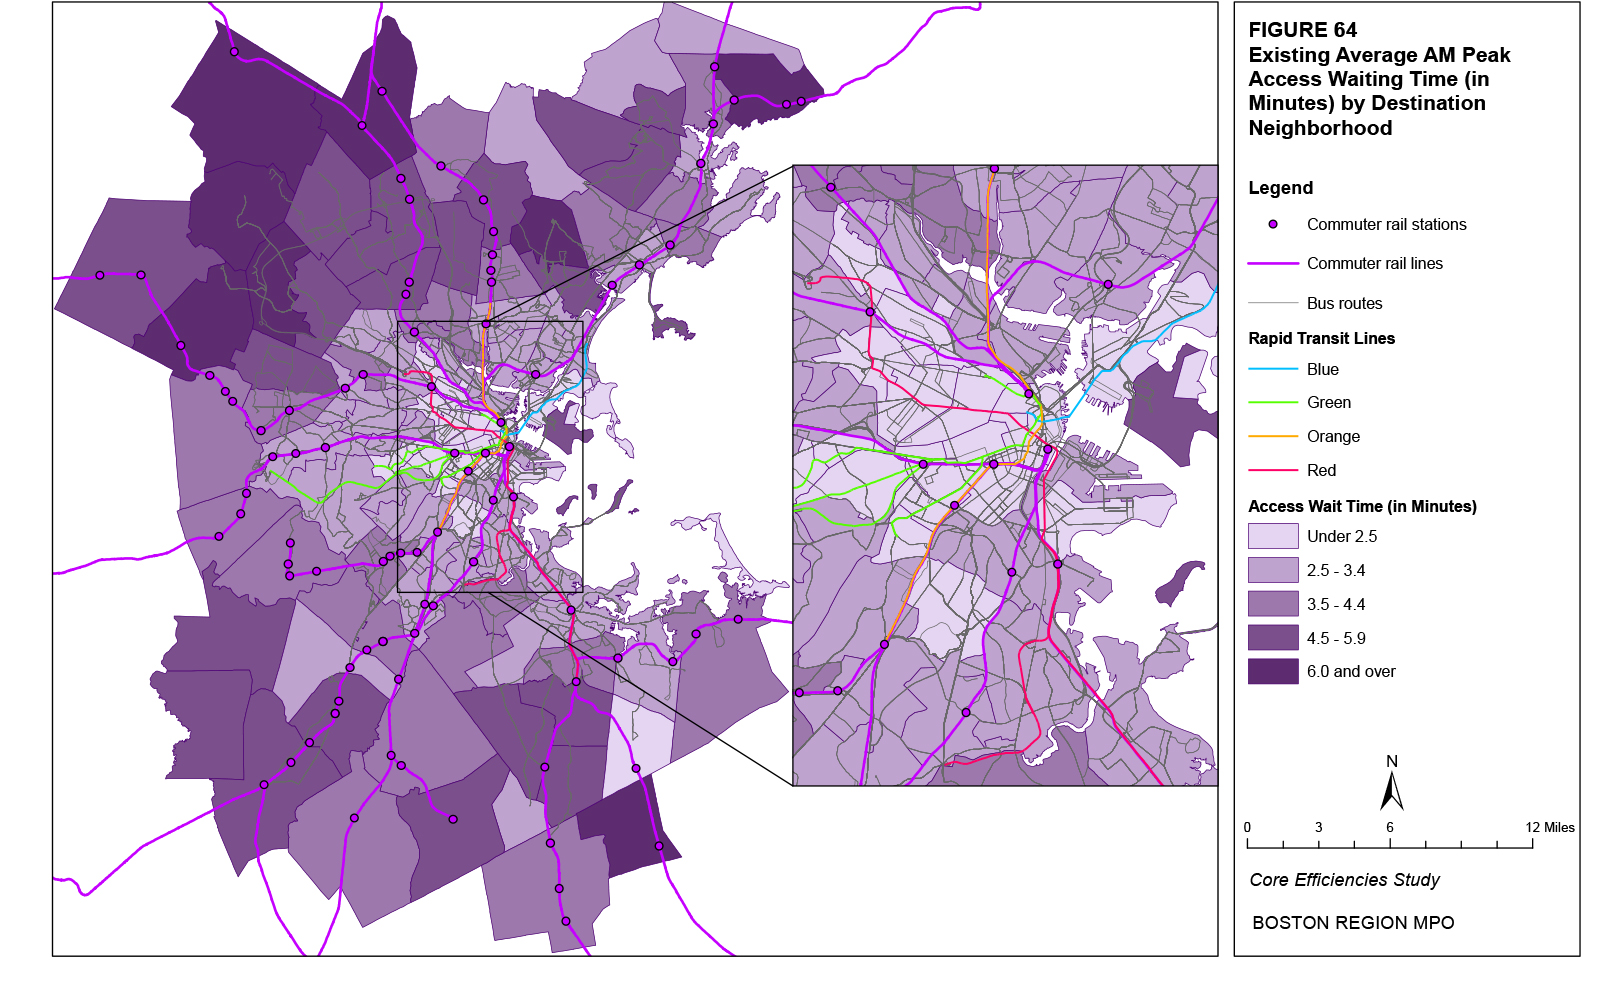 This map shows the existing average AM peak initial waiting times for destination trips by neighborhood.